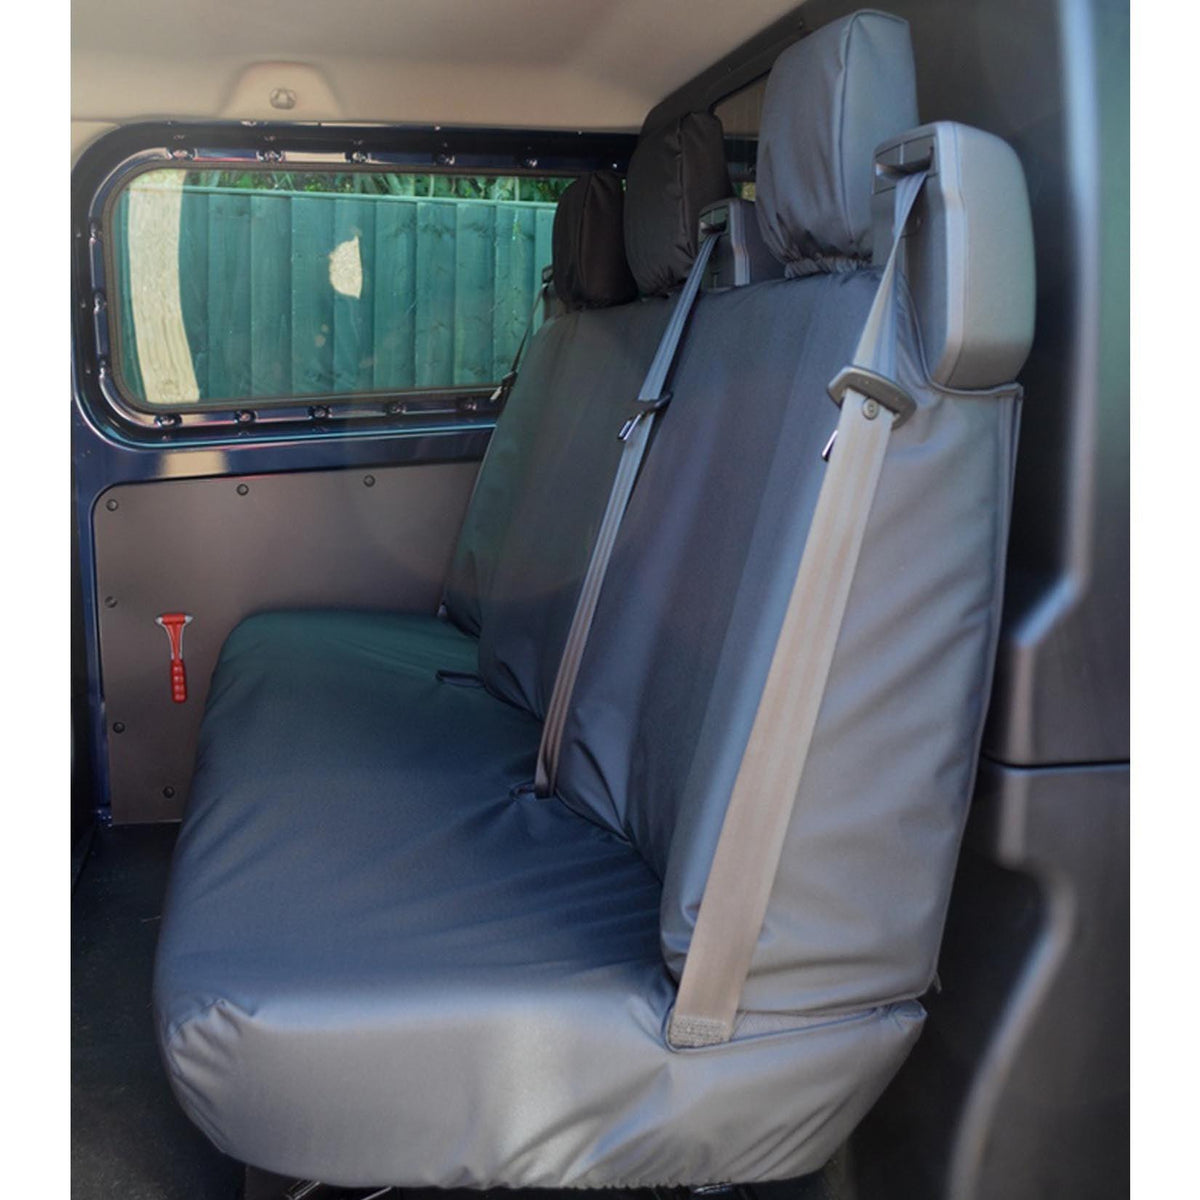 FORD TRANSIT CUSTOM 2013 ON DOUBLE CAB REAR SEAT COVERS – BLACK - Storm Xccessories2